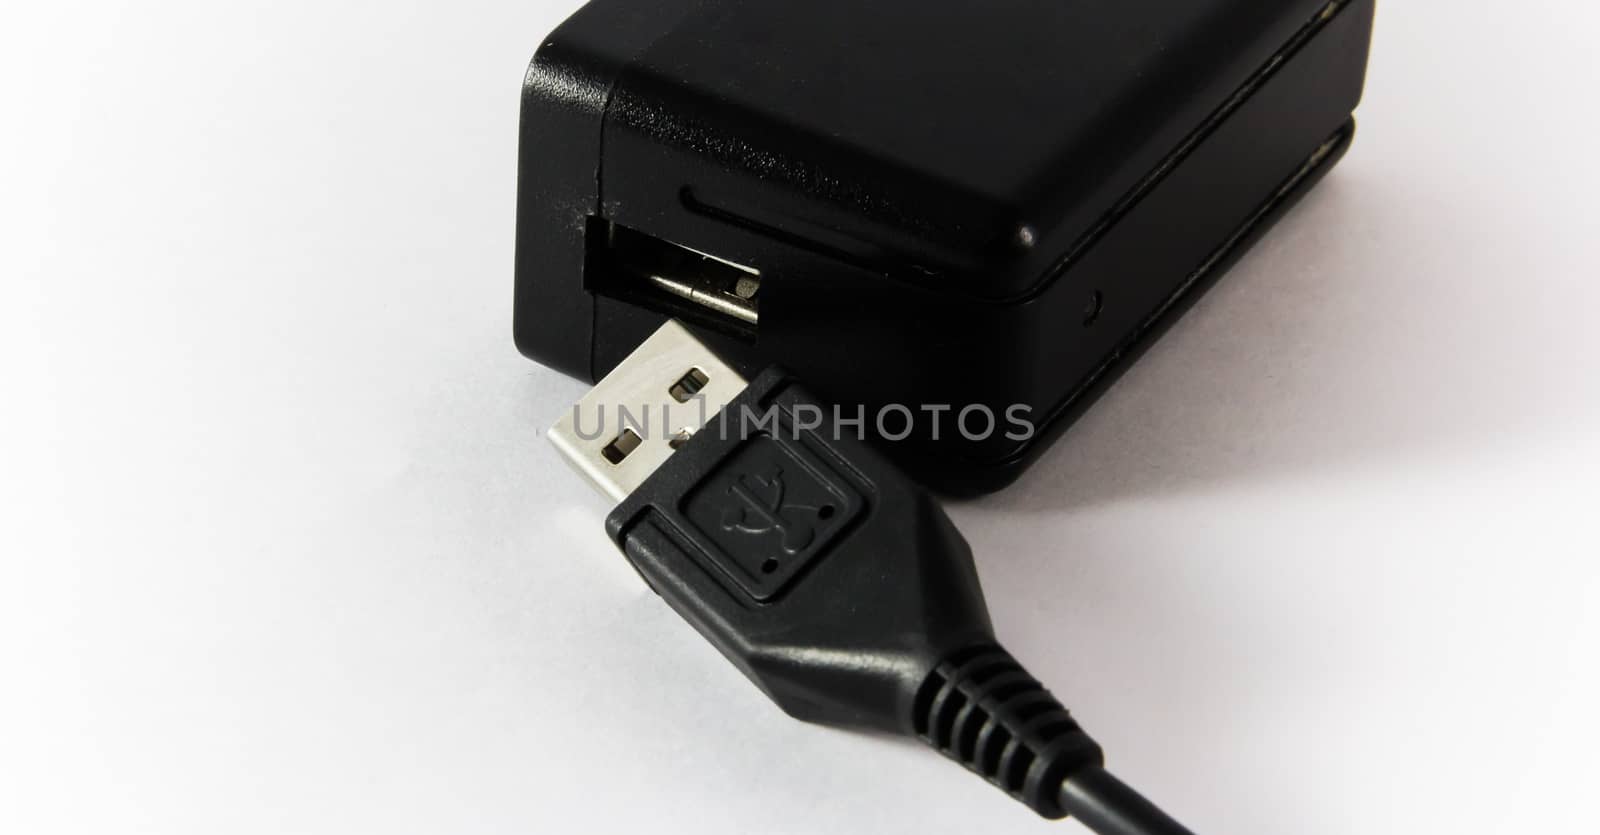 USB hub and USB cable,Technology of Data Connection